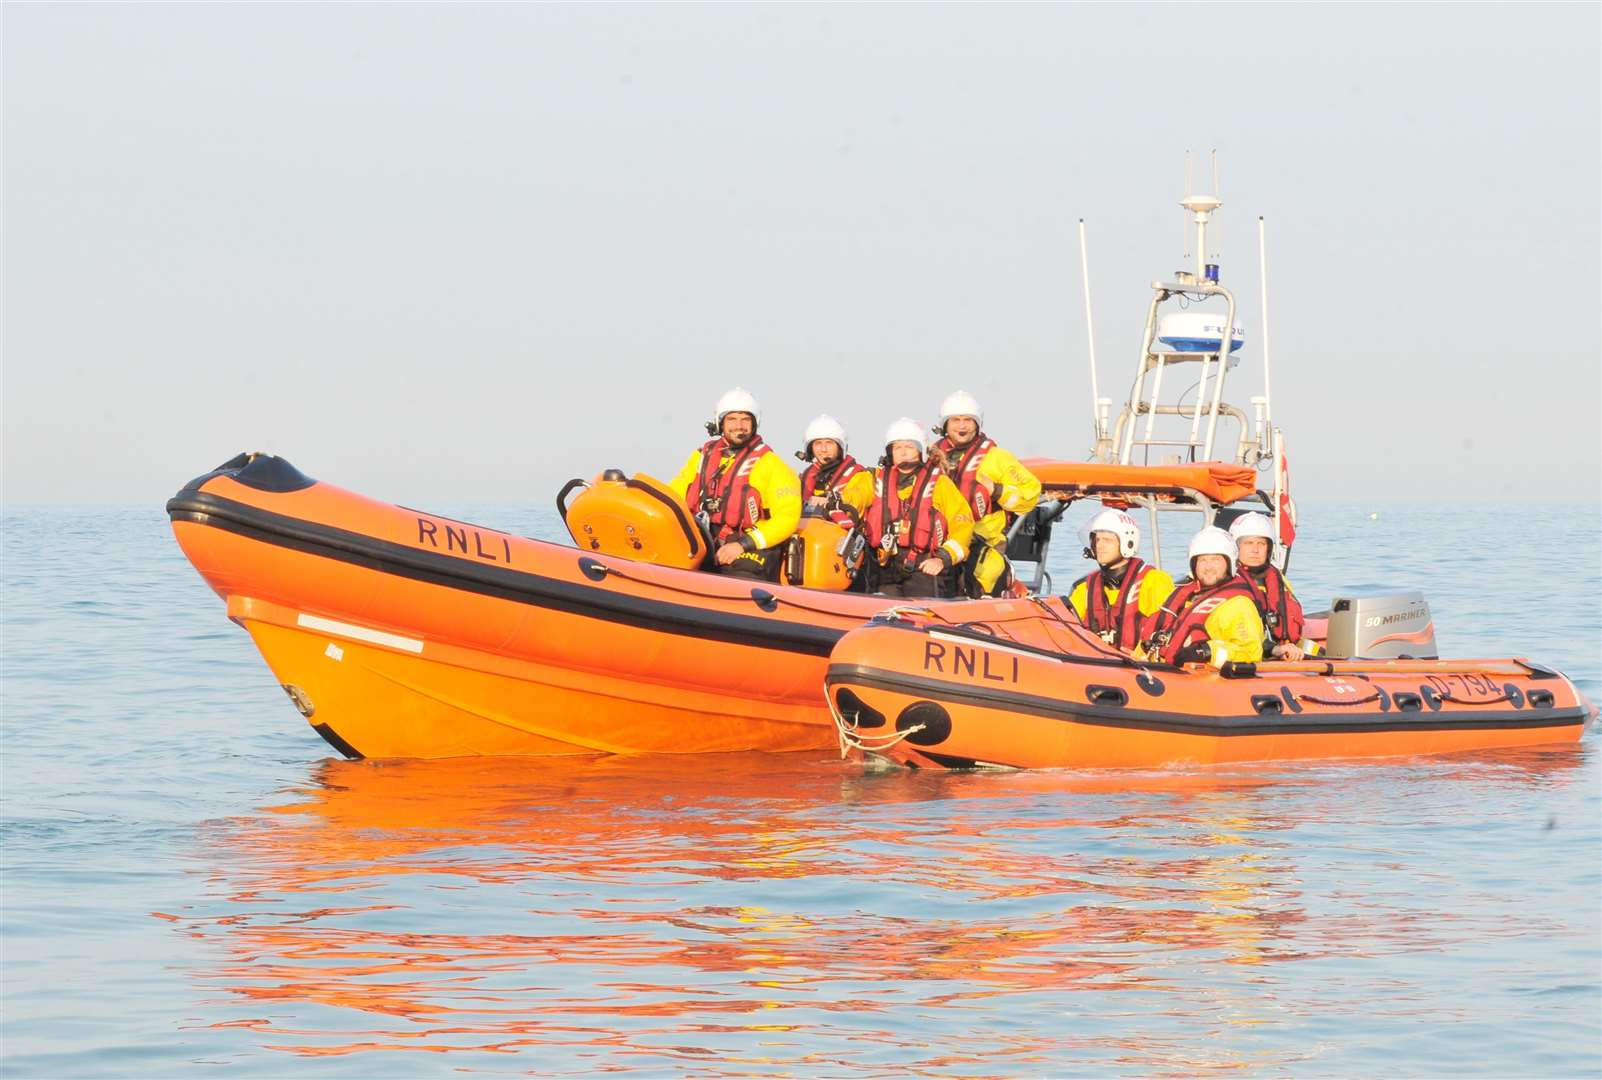 Both of Walmer's lifeboats were involved in last week's rescue operations